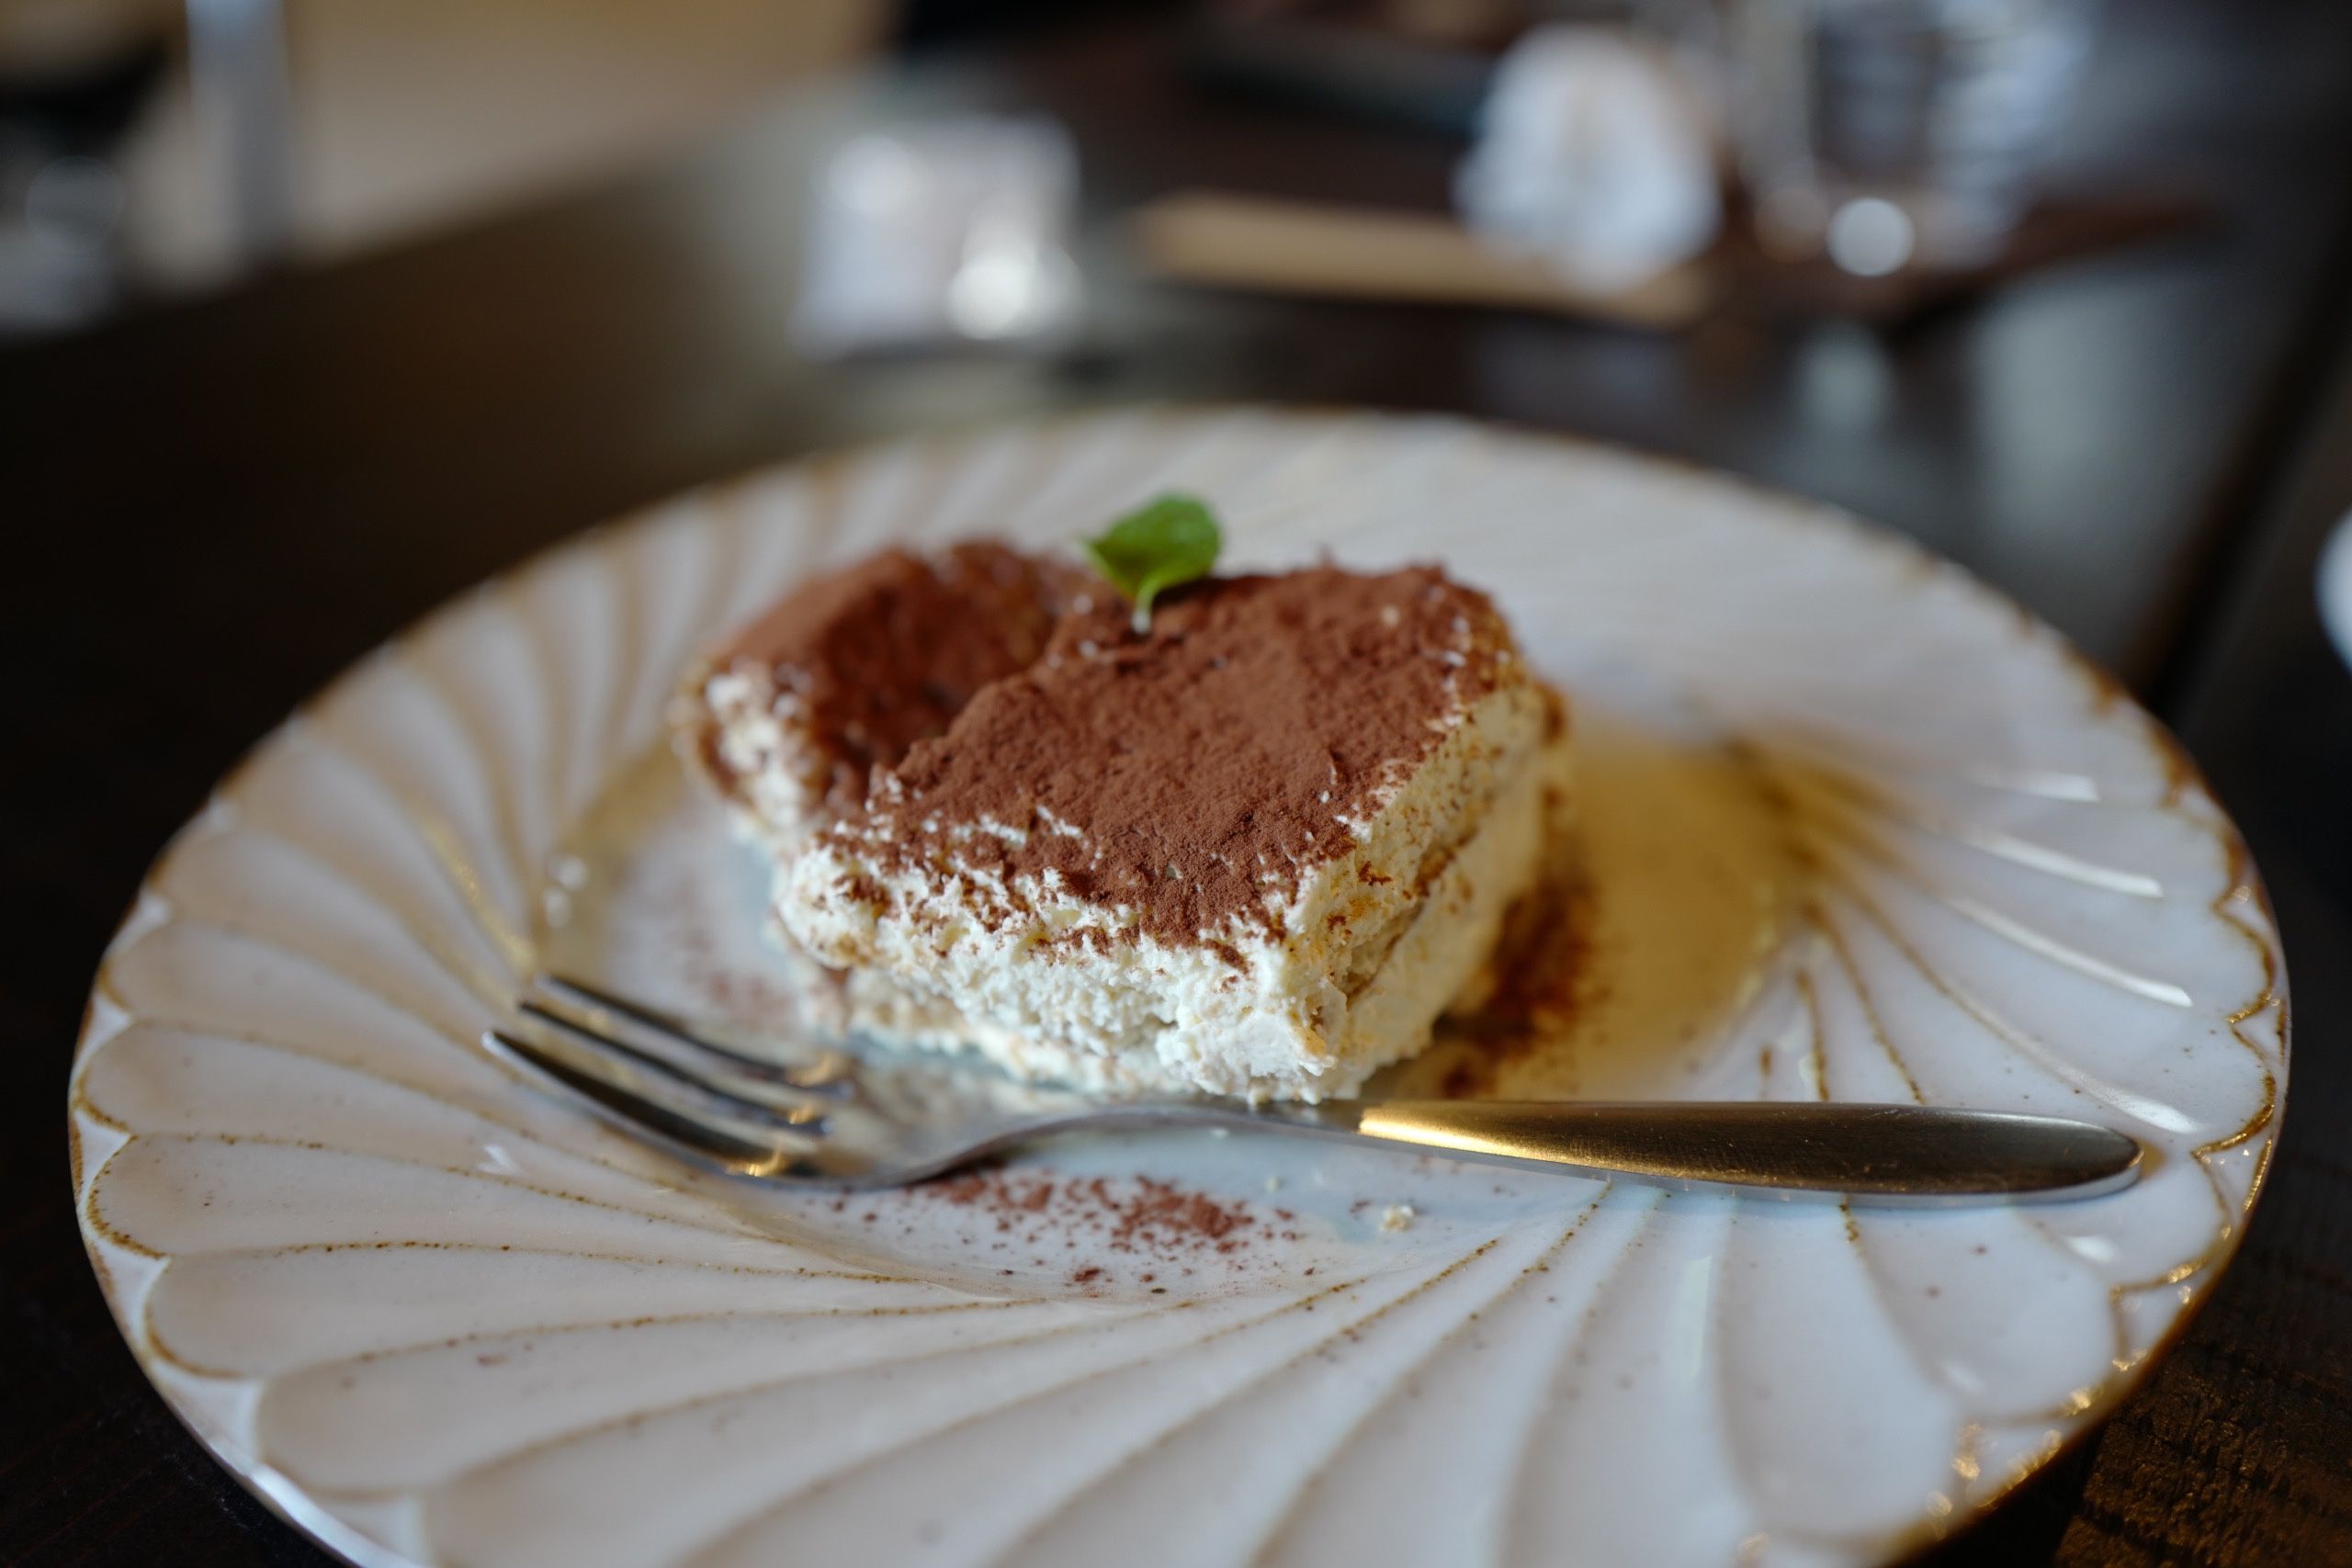 A piece of tiramisù on a plate. Both the plate and the cake look very fancy for a village cafe.